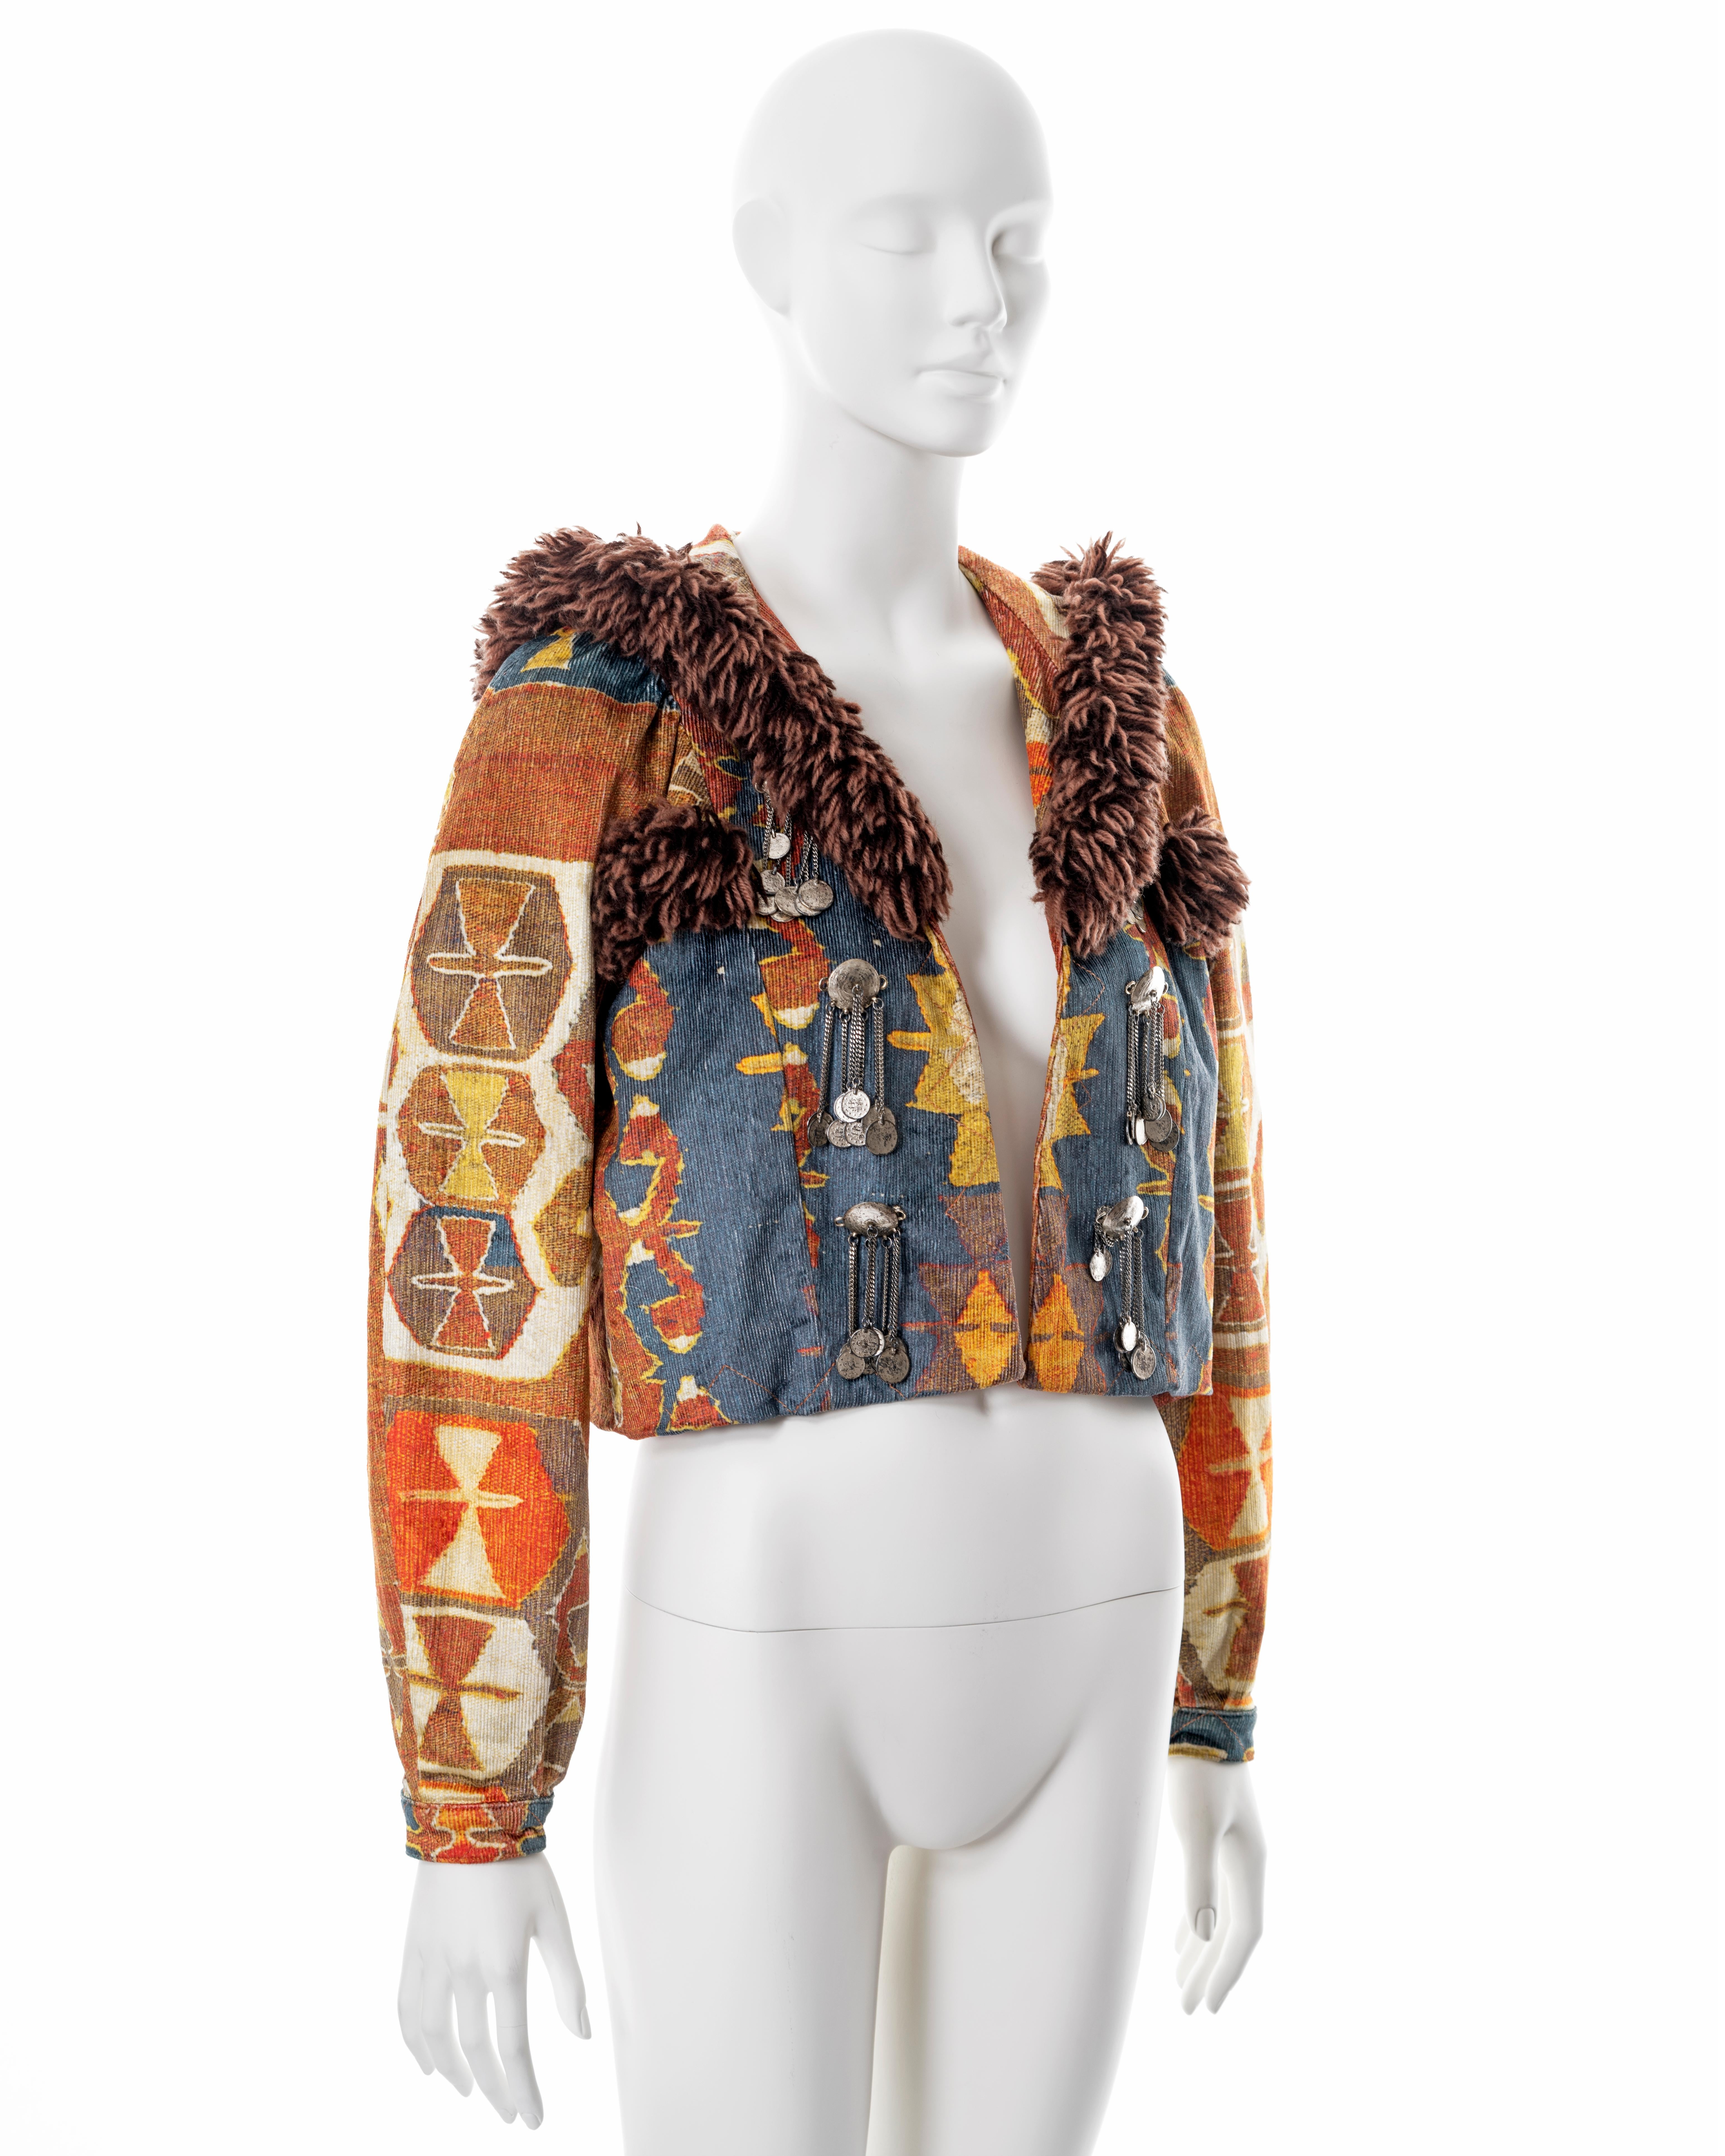 Christian Dior by John Galliano trompe-l'œil carpet print jacket, fw 2002 In Excellent Condition For Sale In London, GB